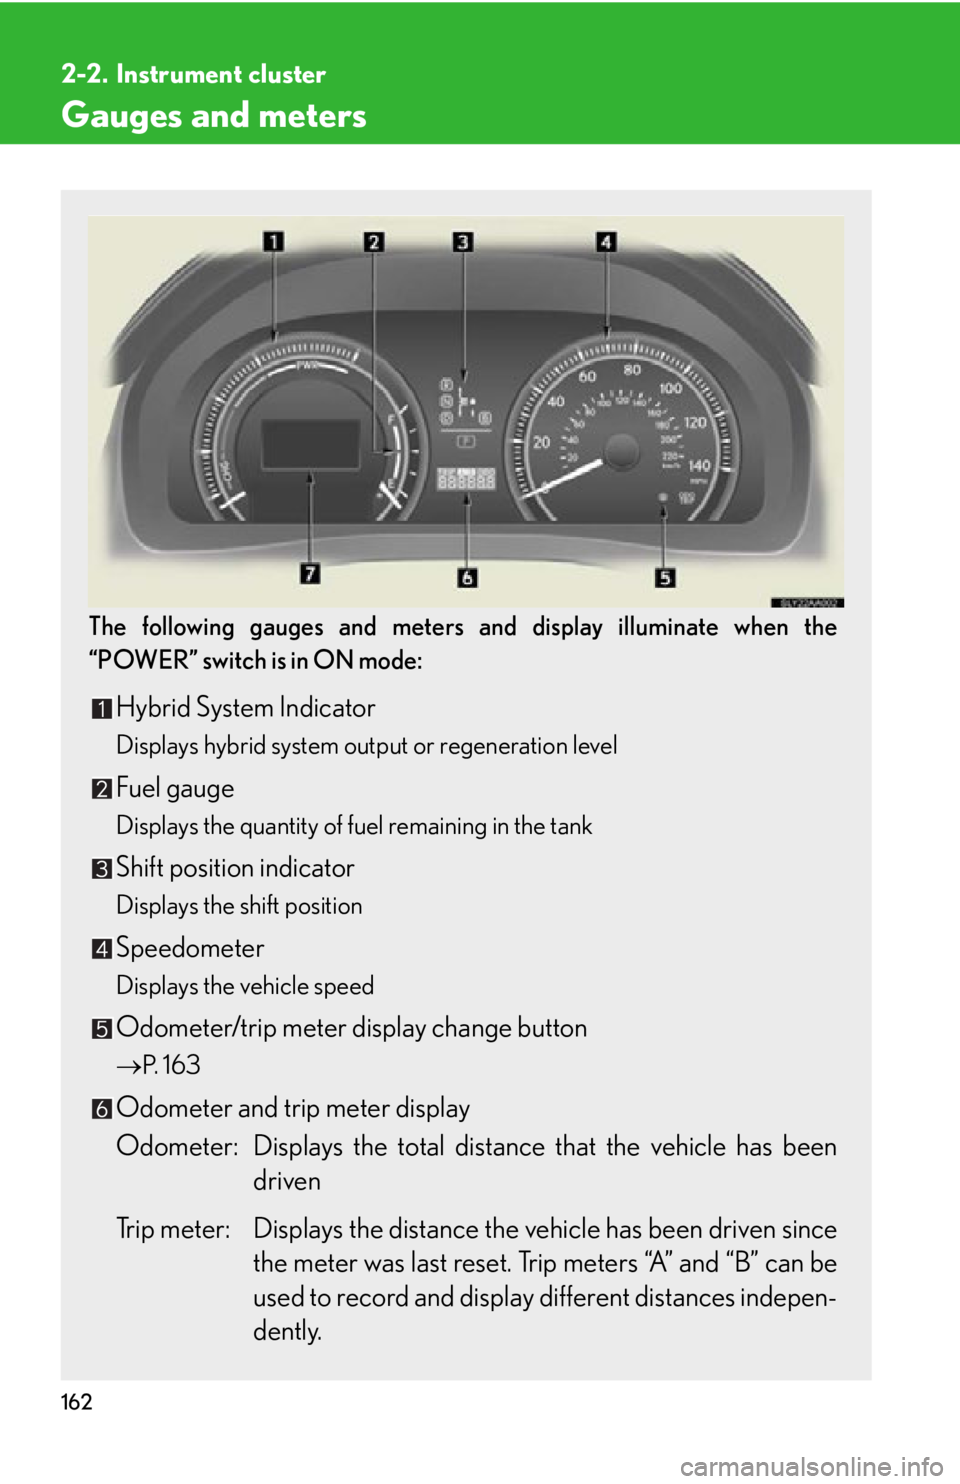 Lexus HS250h 2010  Basic Information Before Operation / LEXUS 2010 HS250H OWNERS MANUAL (OM75006U) 162
2-2. Instrument cluster
Gauges and meters
The following gauges and meters and display illuminate when the 
“POWER” switch is in ON mode:
Hybrid System Indicator
Displays hybrid system output o